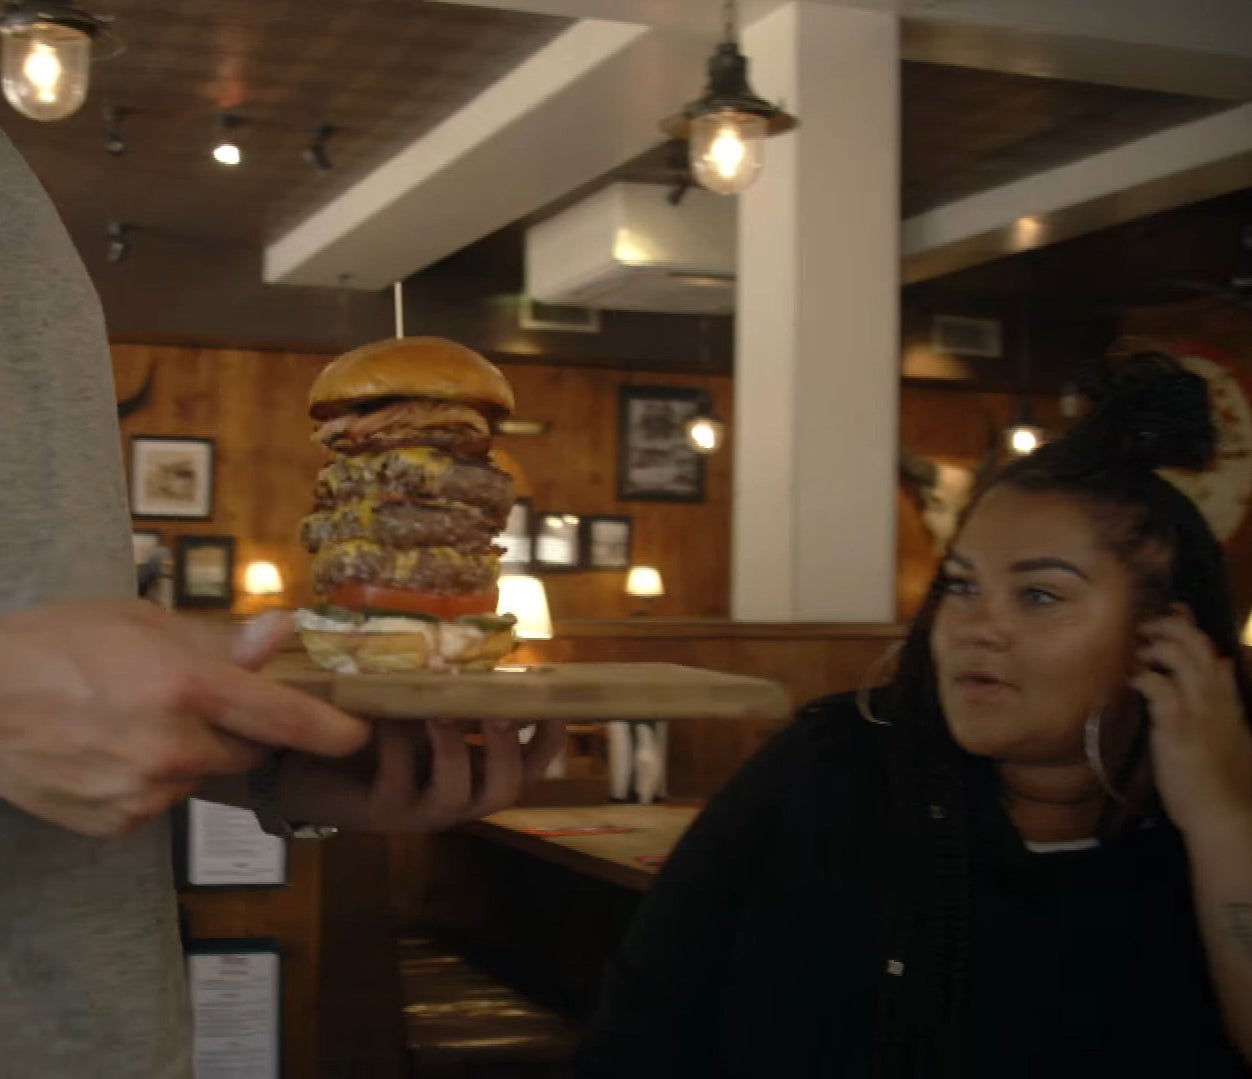 patron stares at a burger that is several stacks high